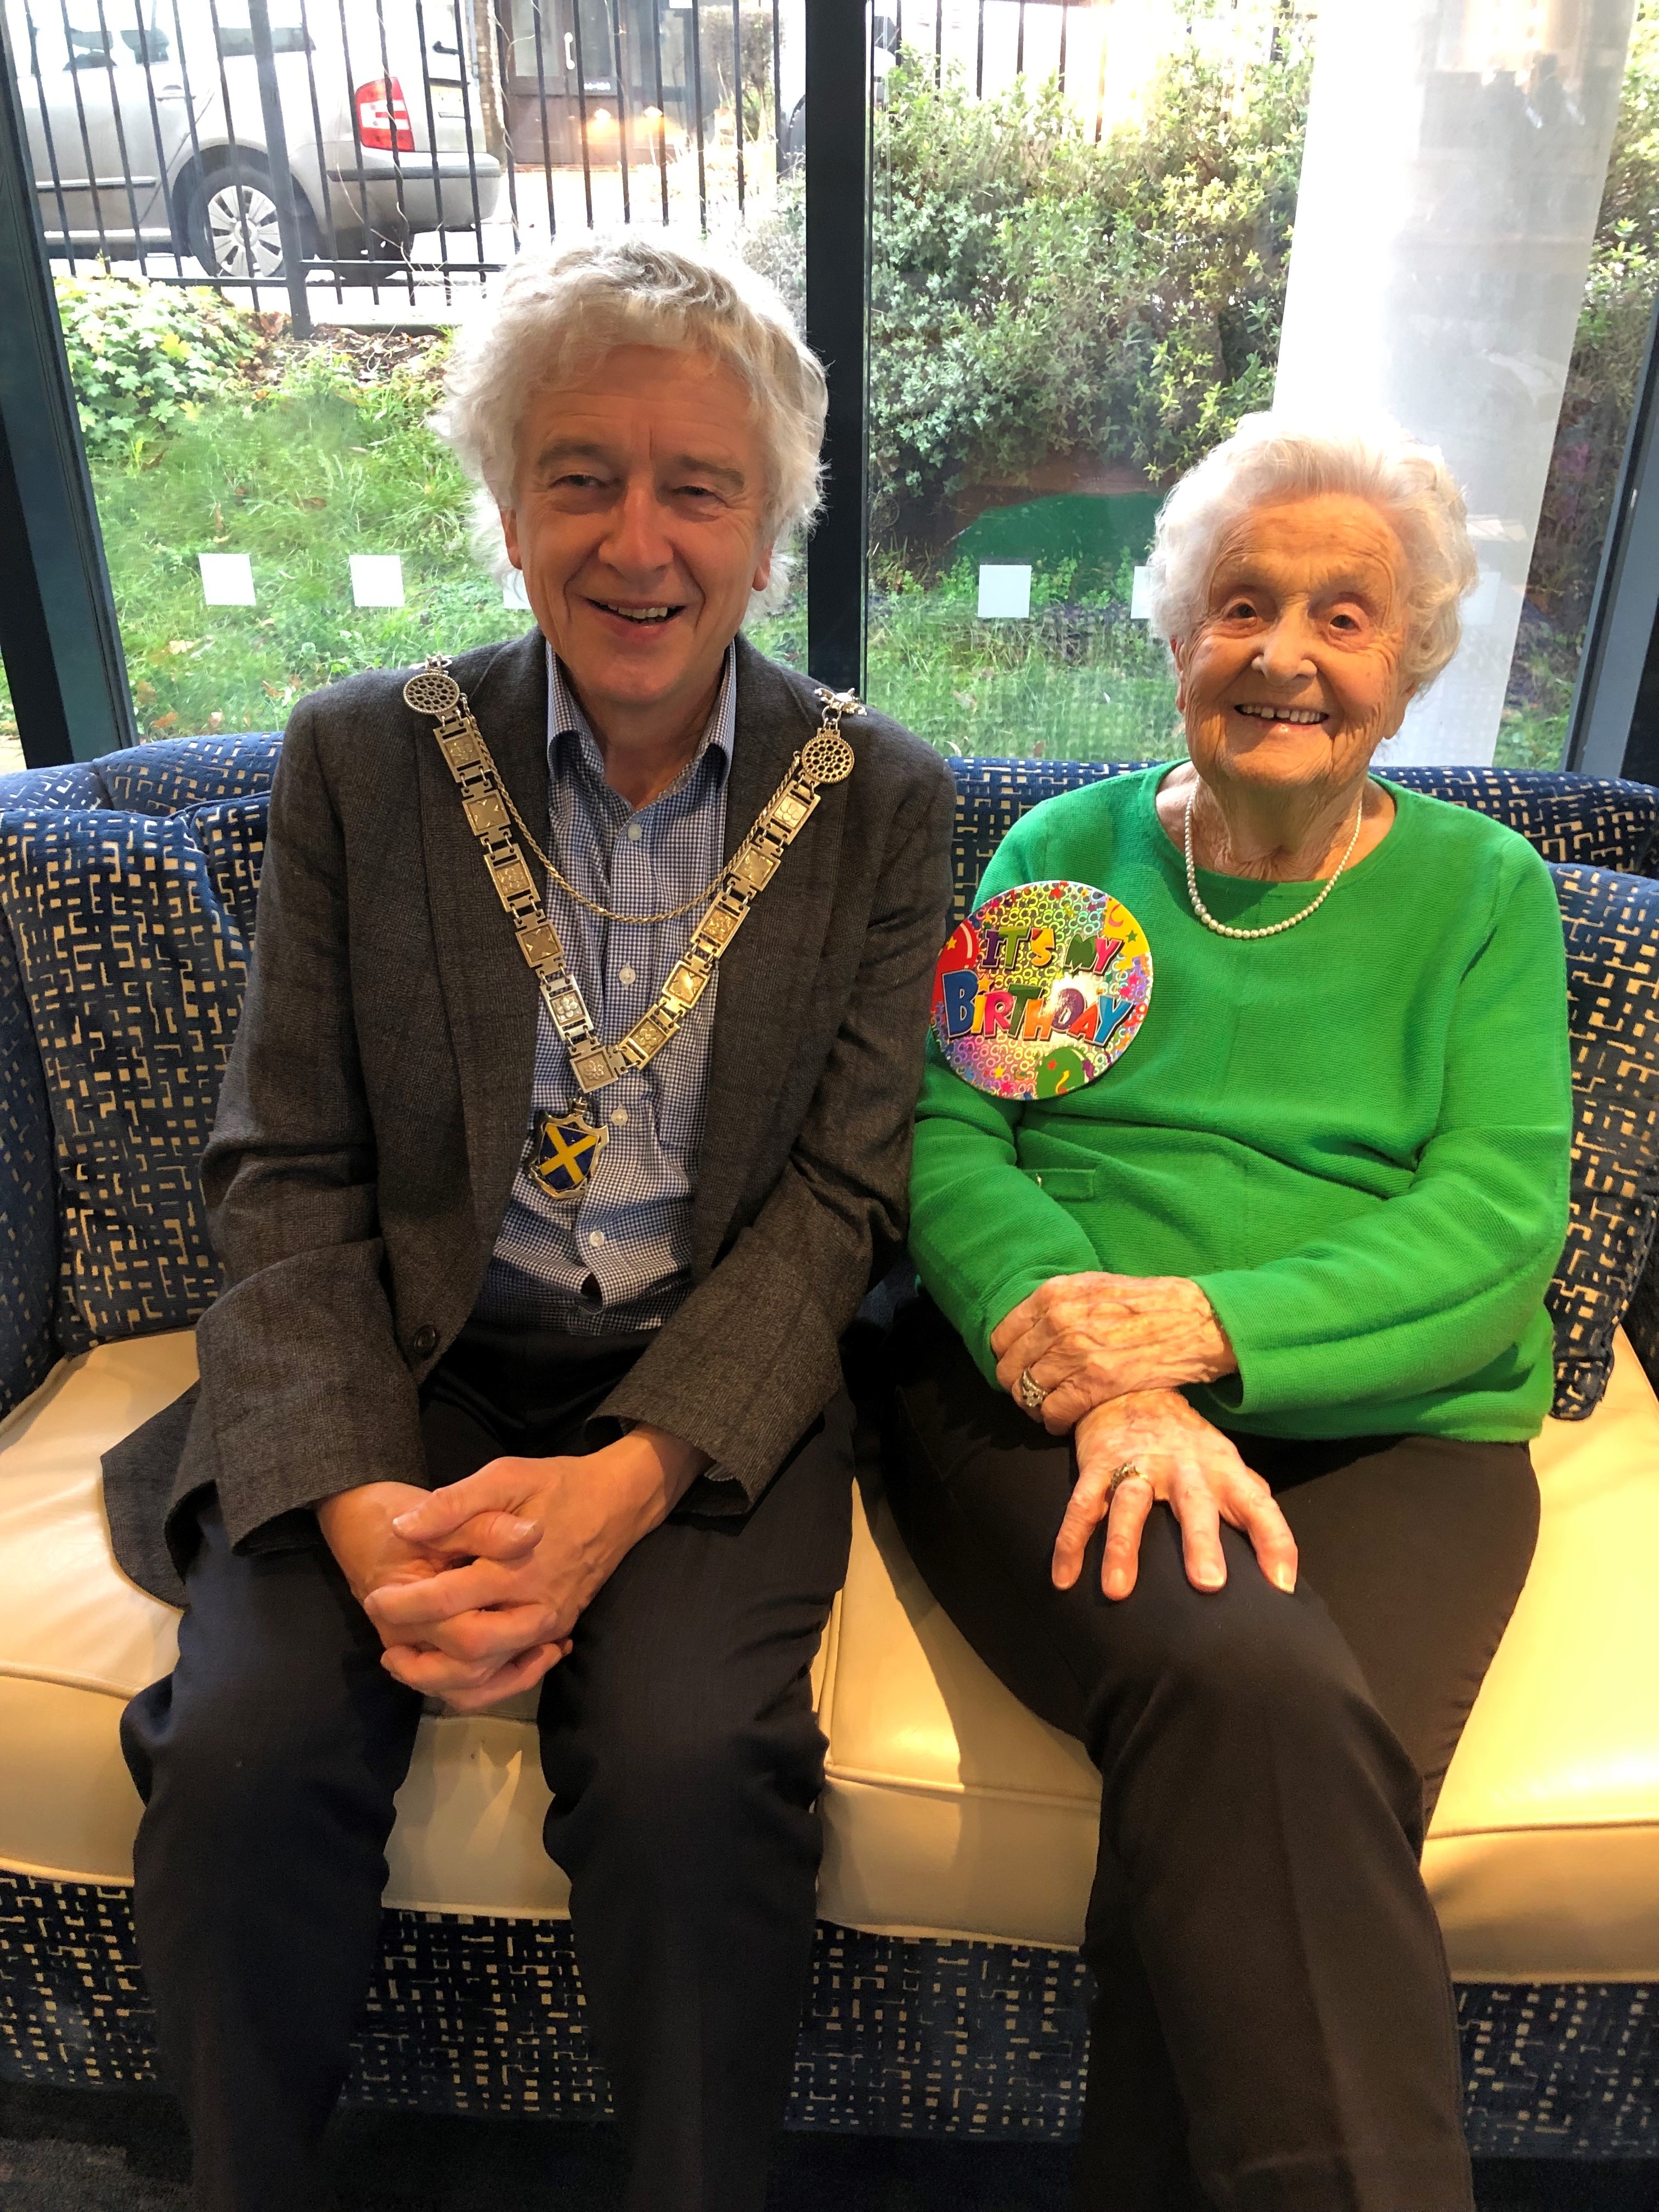 The Mayor, Cllr Anthony Rowlands, with resident Amelia 'Mim' Neal, celebrating her 106th birthday